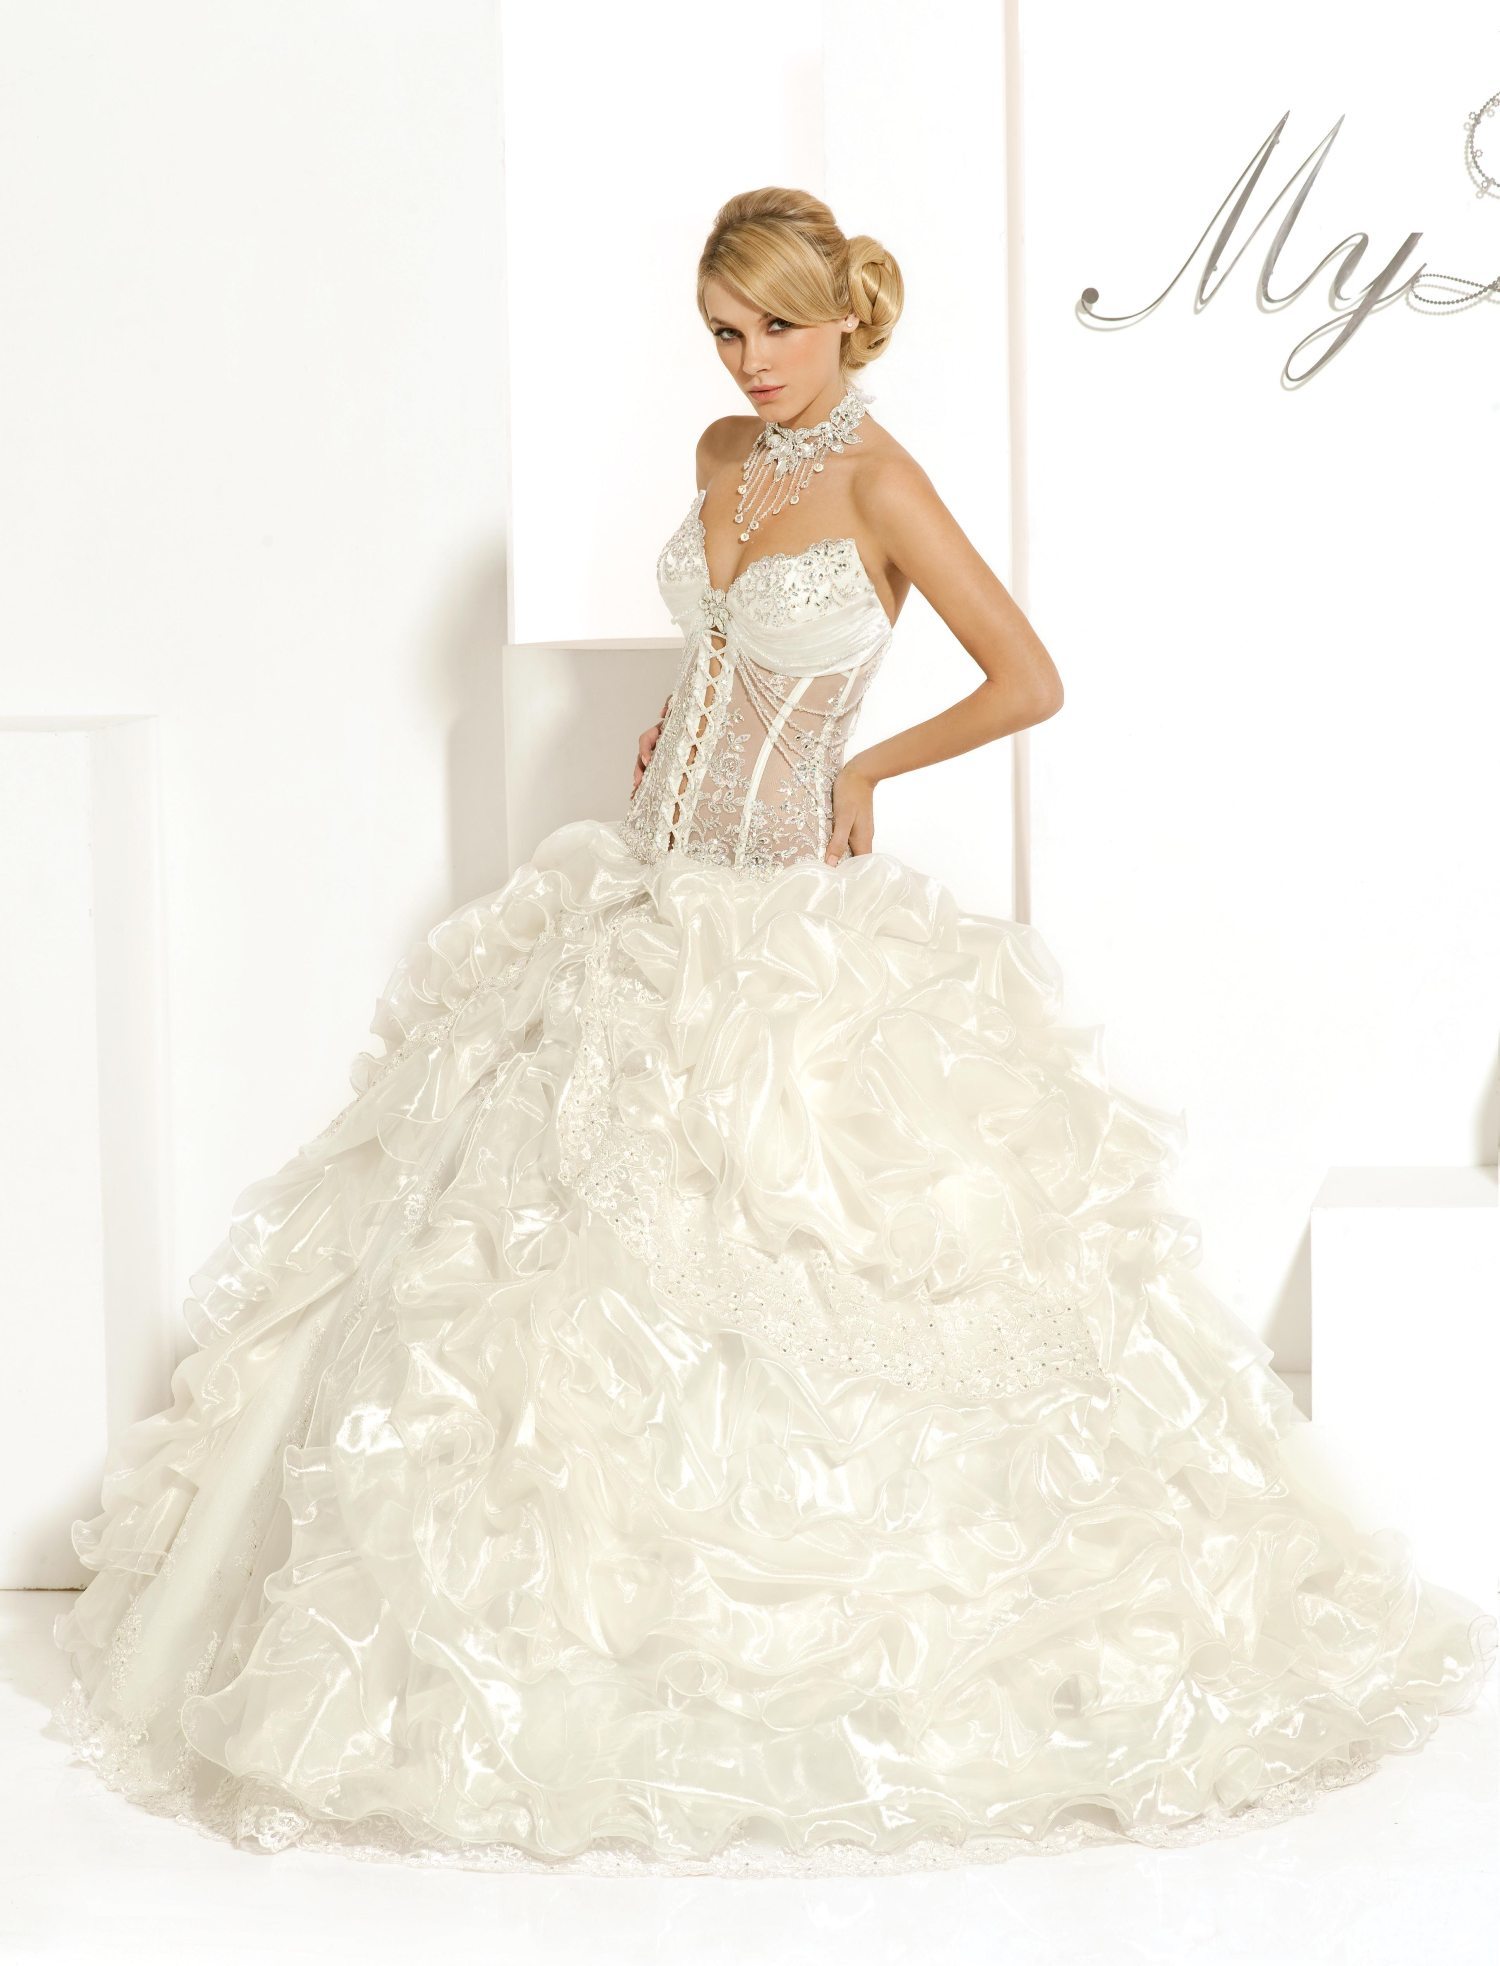 Wedding Dress - Lady Mabelle - Lady Mabelle Skirt - Lady Mabelle Train | MyLady Bridal Gown